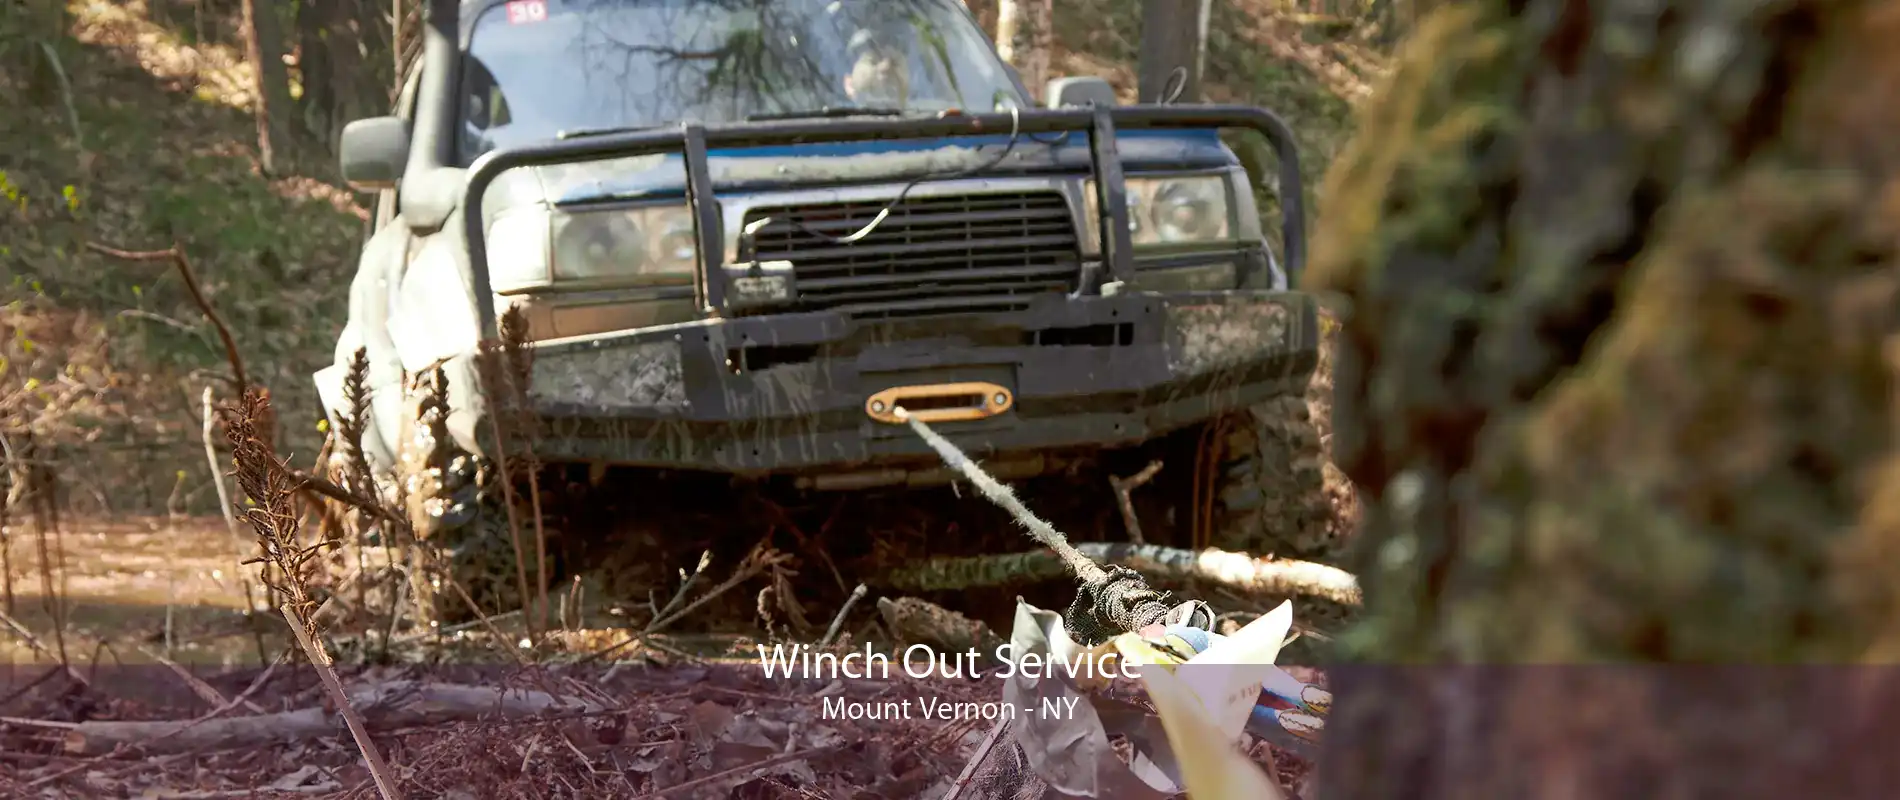 Winch Out Service Mount Vernon - NY